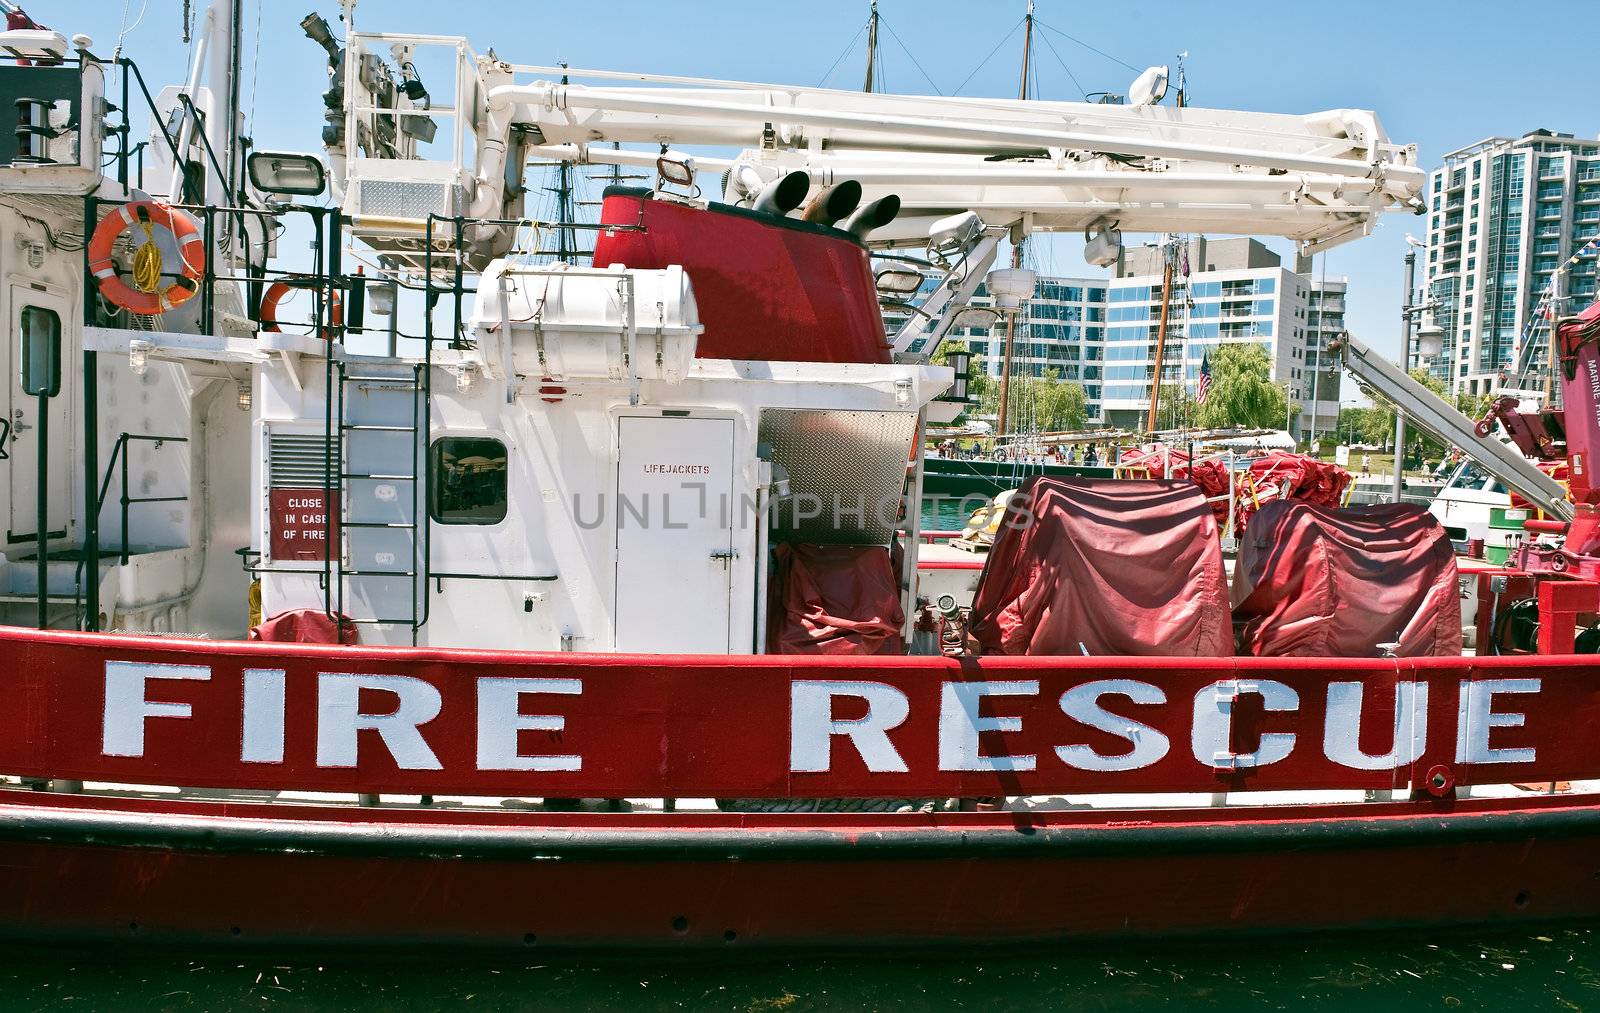 Fire rescue boat by Marcus